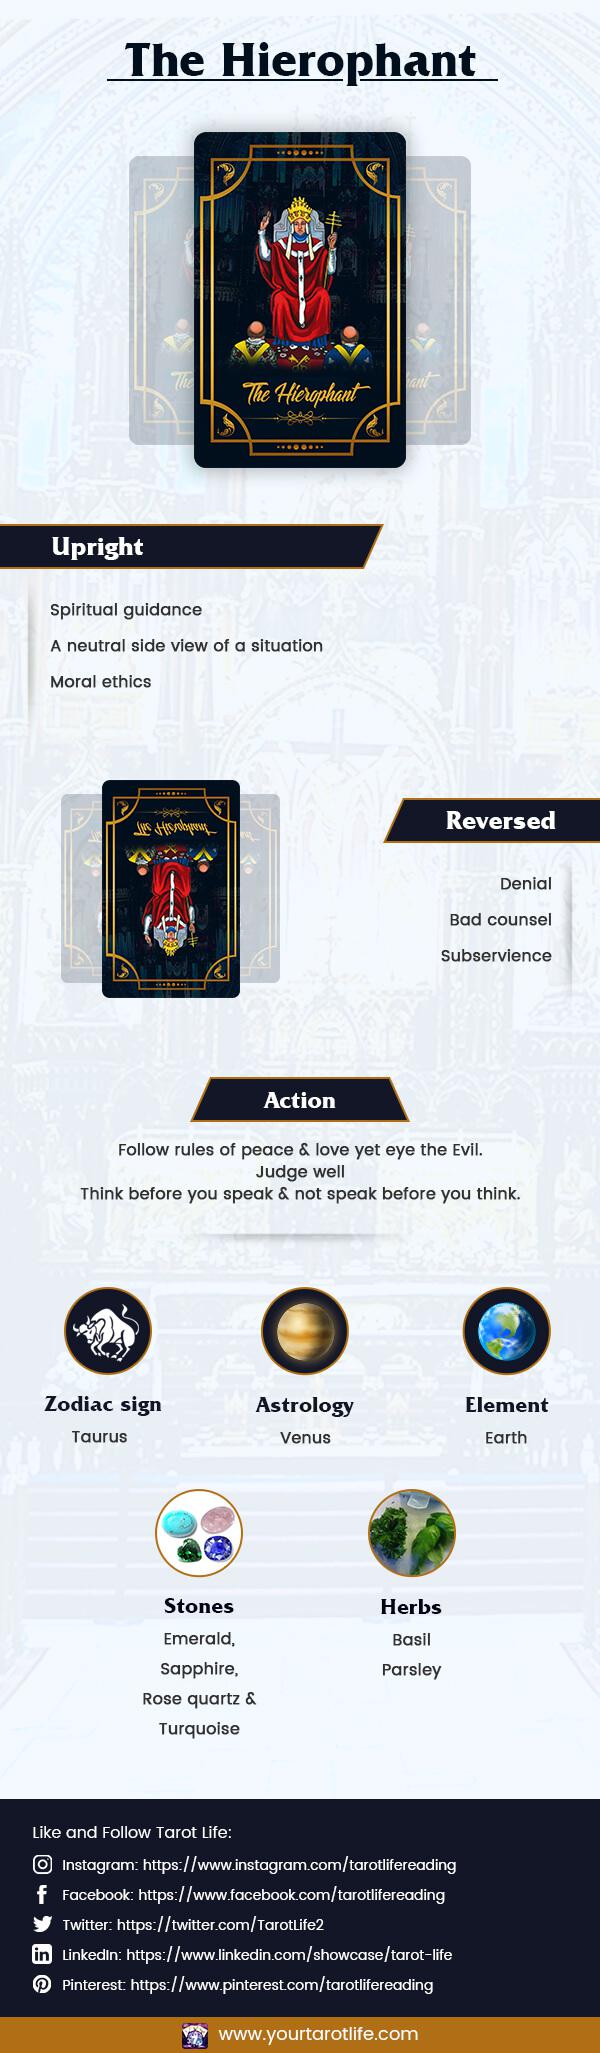 The Meaning of The Hierophant Tarot Card